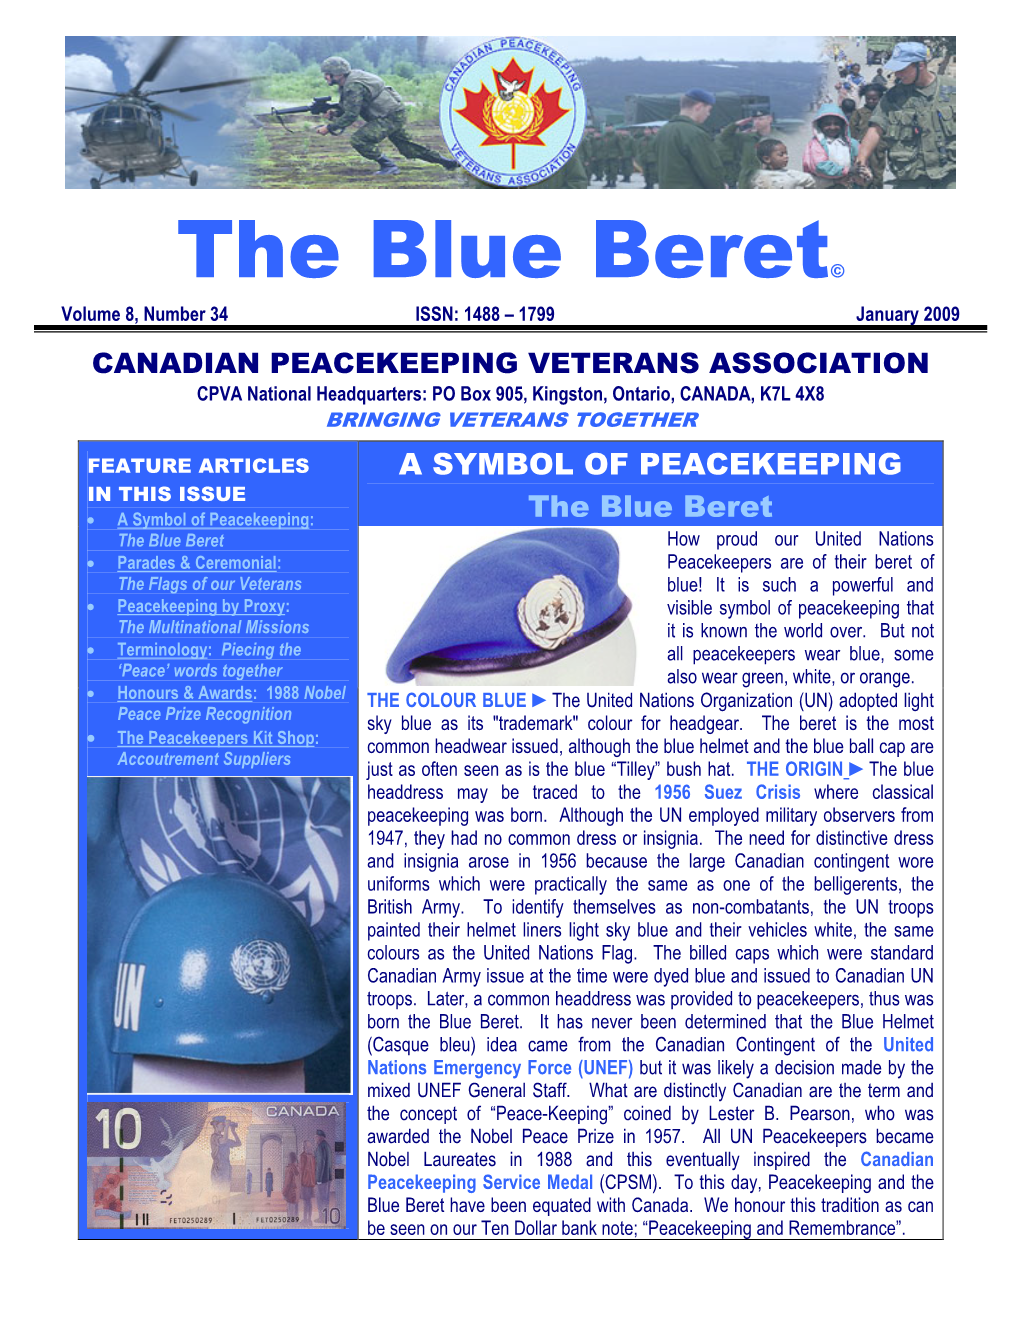 The Blue Beret© Volume 8, Number 34 ISSN: 1488 – 1799 January 2009